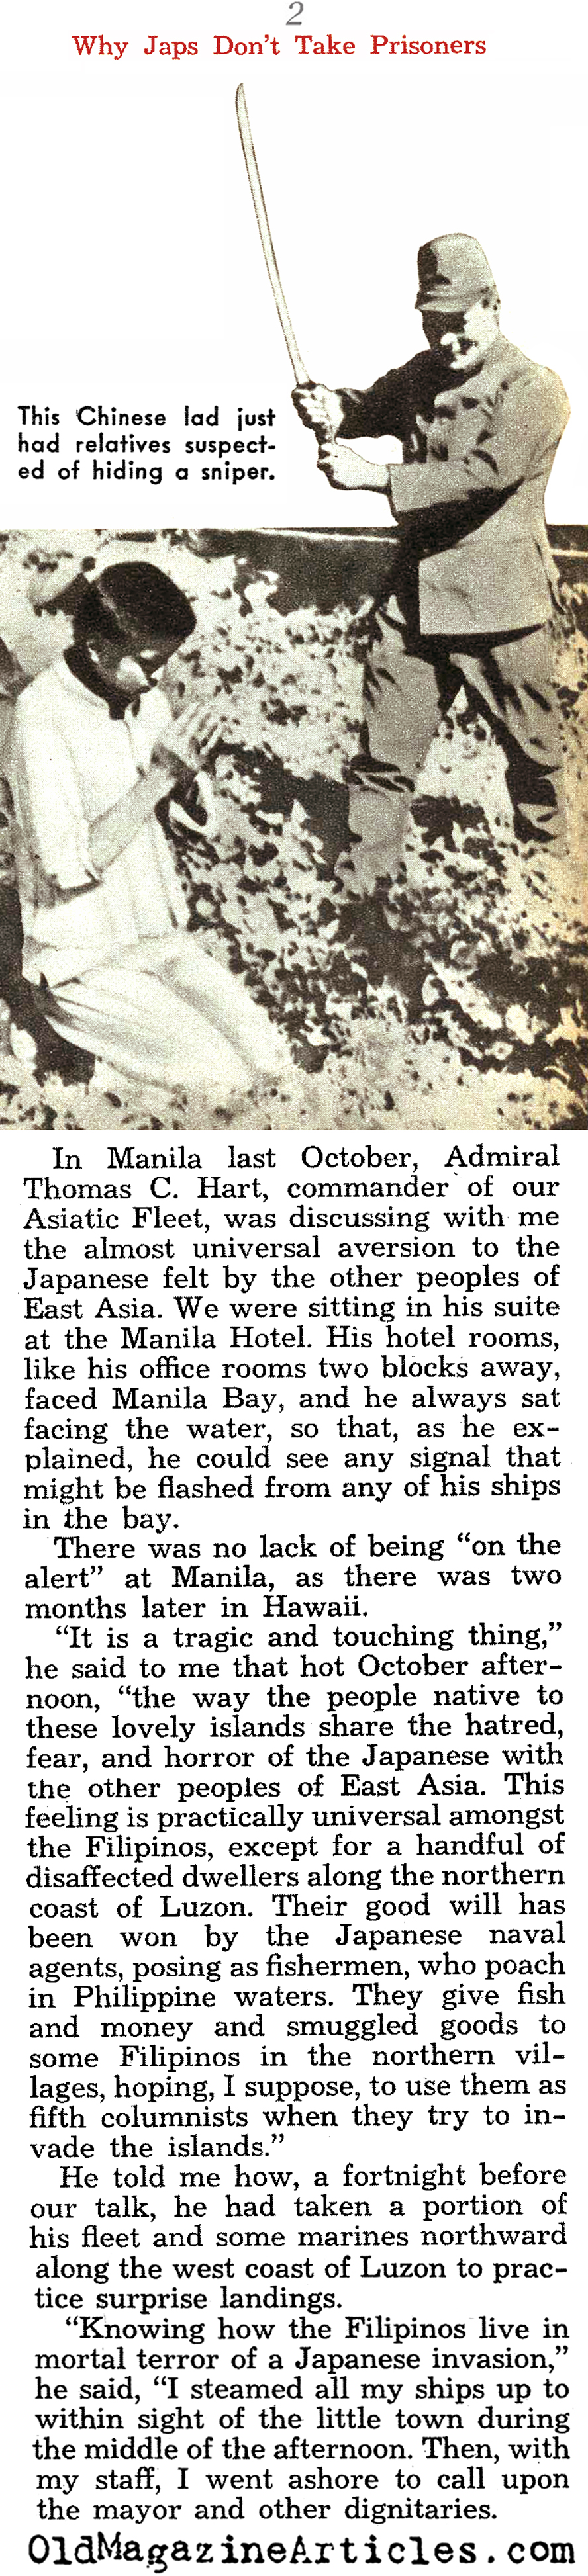 Why the Japanese Didn't take Prisoners (Liberty Magazine, 1942)